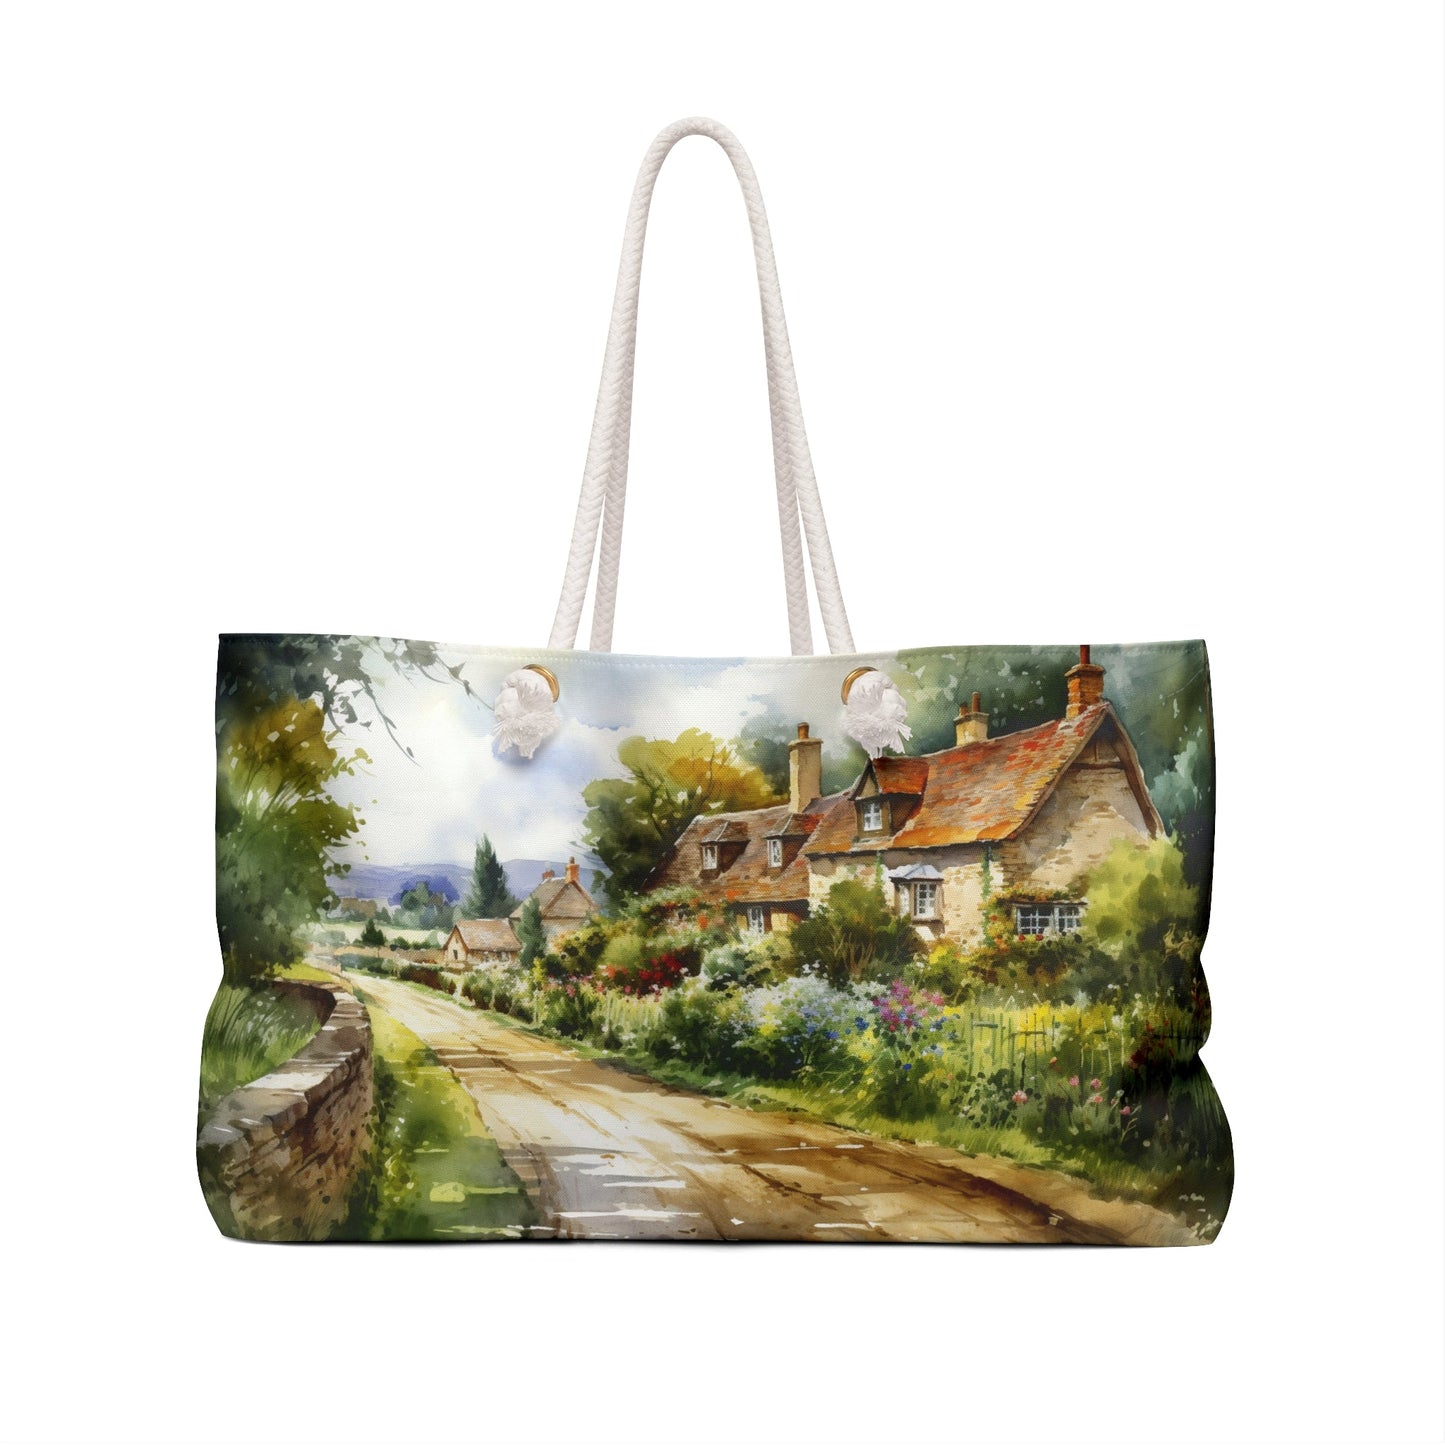 Womens Traveler Tote, Elegant Watercolor Cottages - "The Road Less Traveled", Personalize, Unique Art Work, Mom, Aunt, Grandmother Gift - FlooredByArt